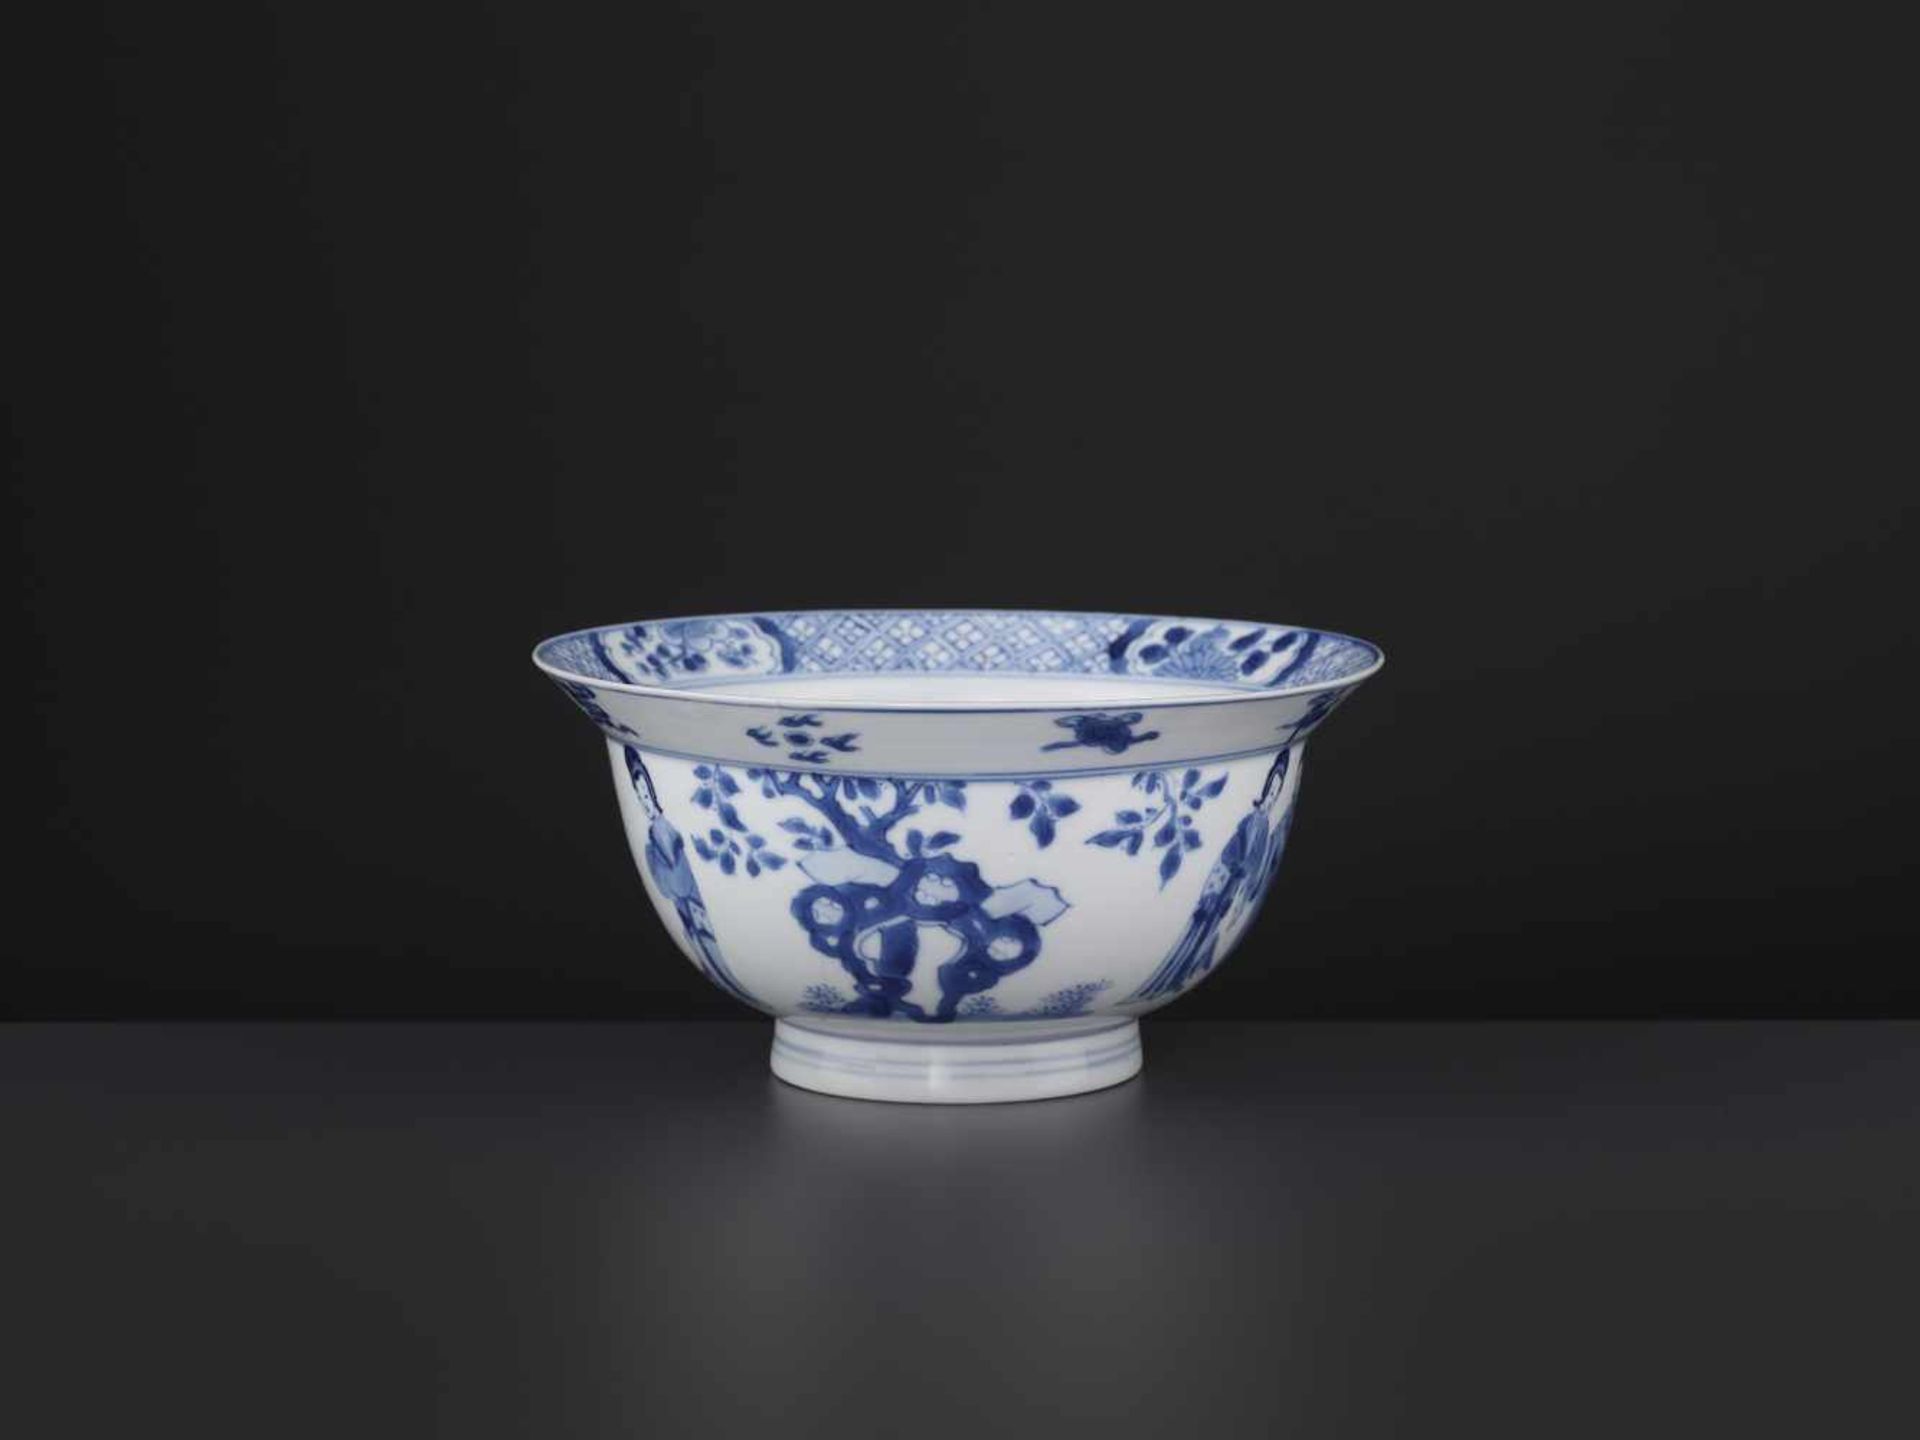 A KANGXI BLUE & WHITE KLAPMUTS BOWLChina, 1662-1722. Delicately painted with scenes from ‘Romance of - Image 5 of 8